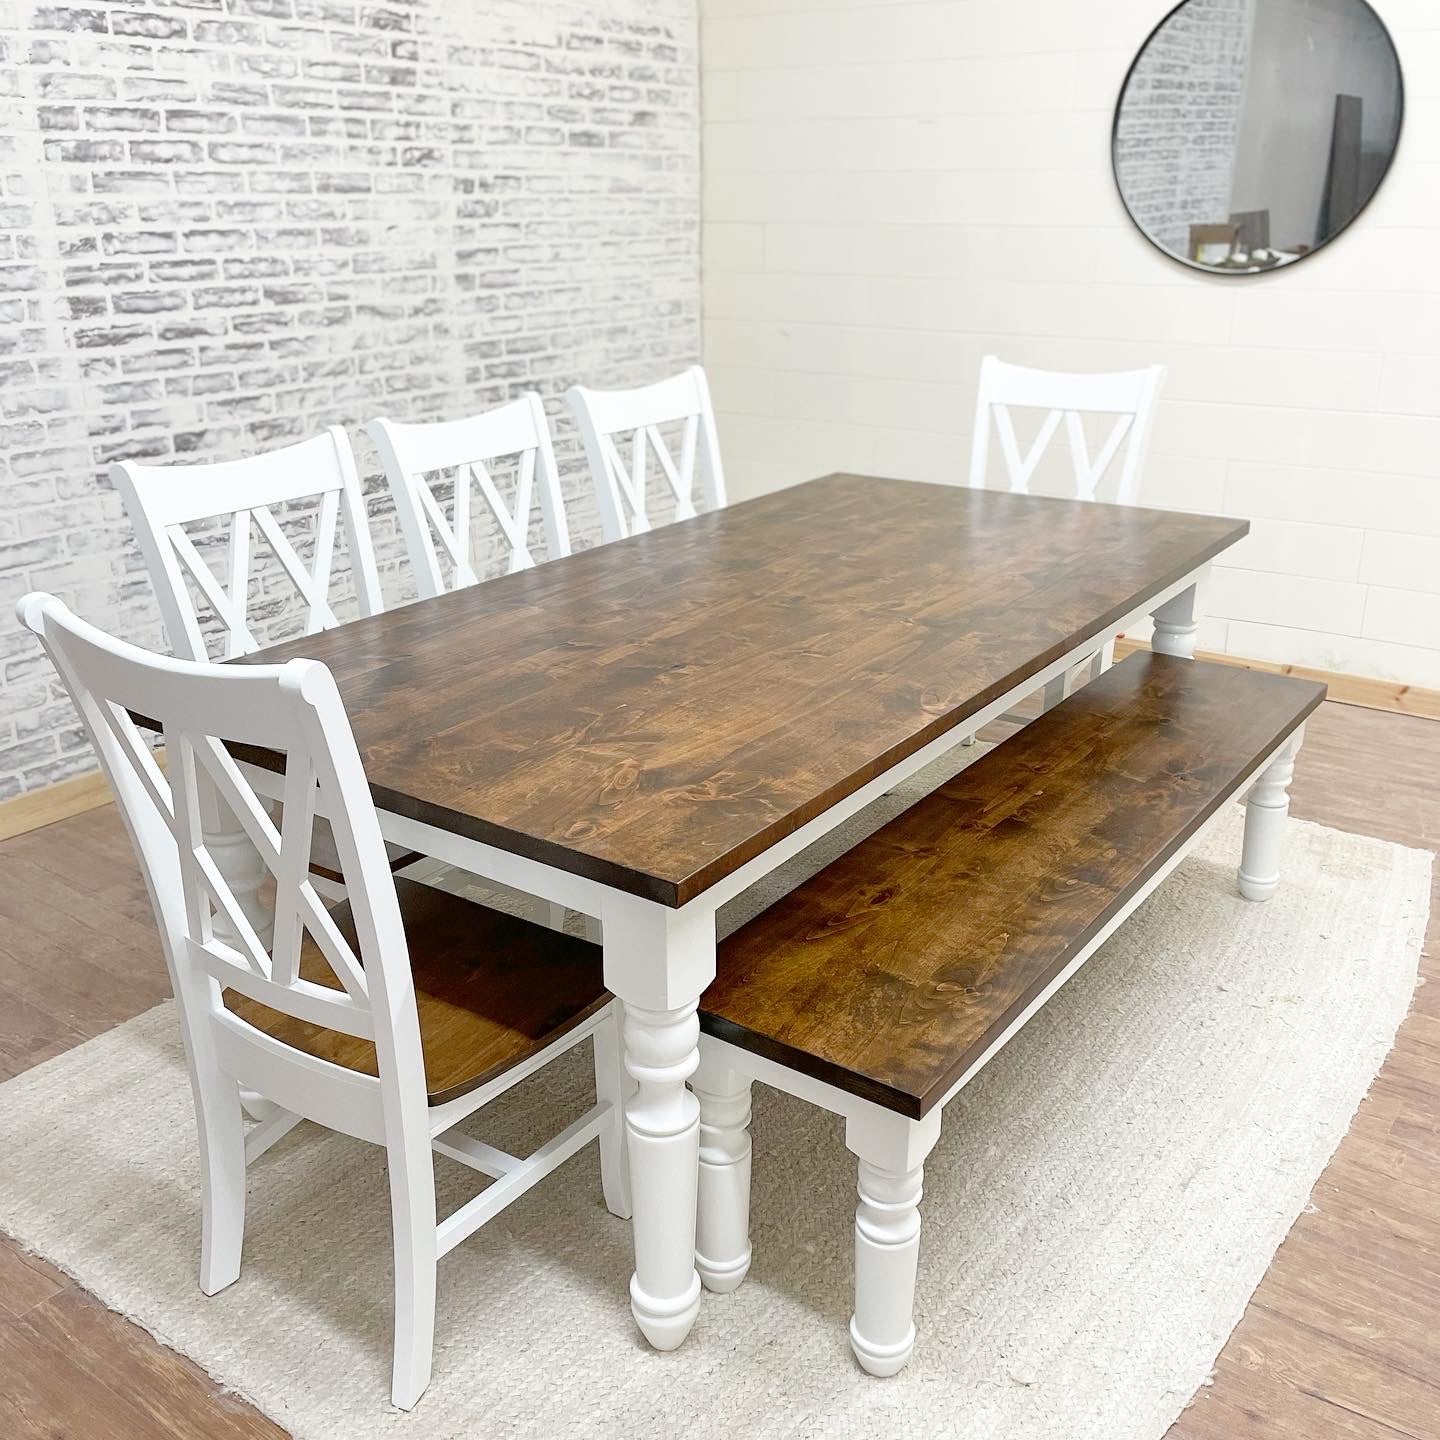 Pictured with an 8' L x 42" W Rustic Alder top stained Honey with a White painted base. Pictured with a matching bench and 5 Double Cross Back Chairs.